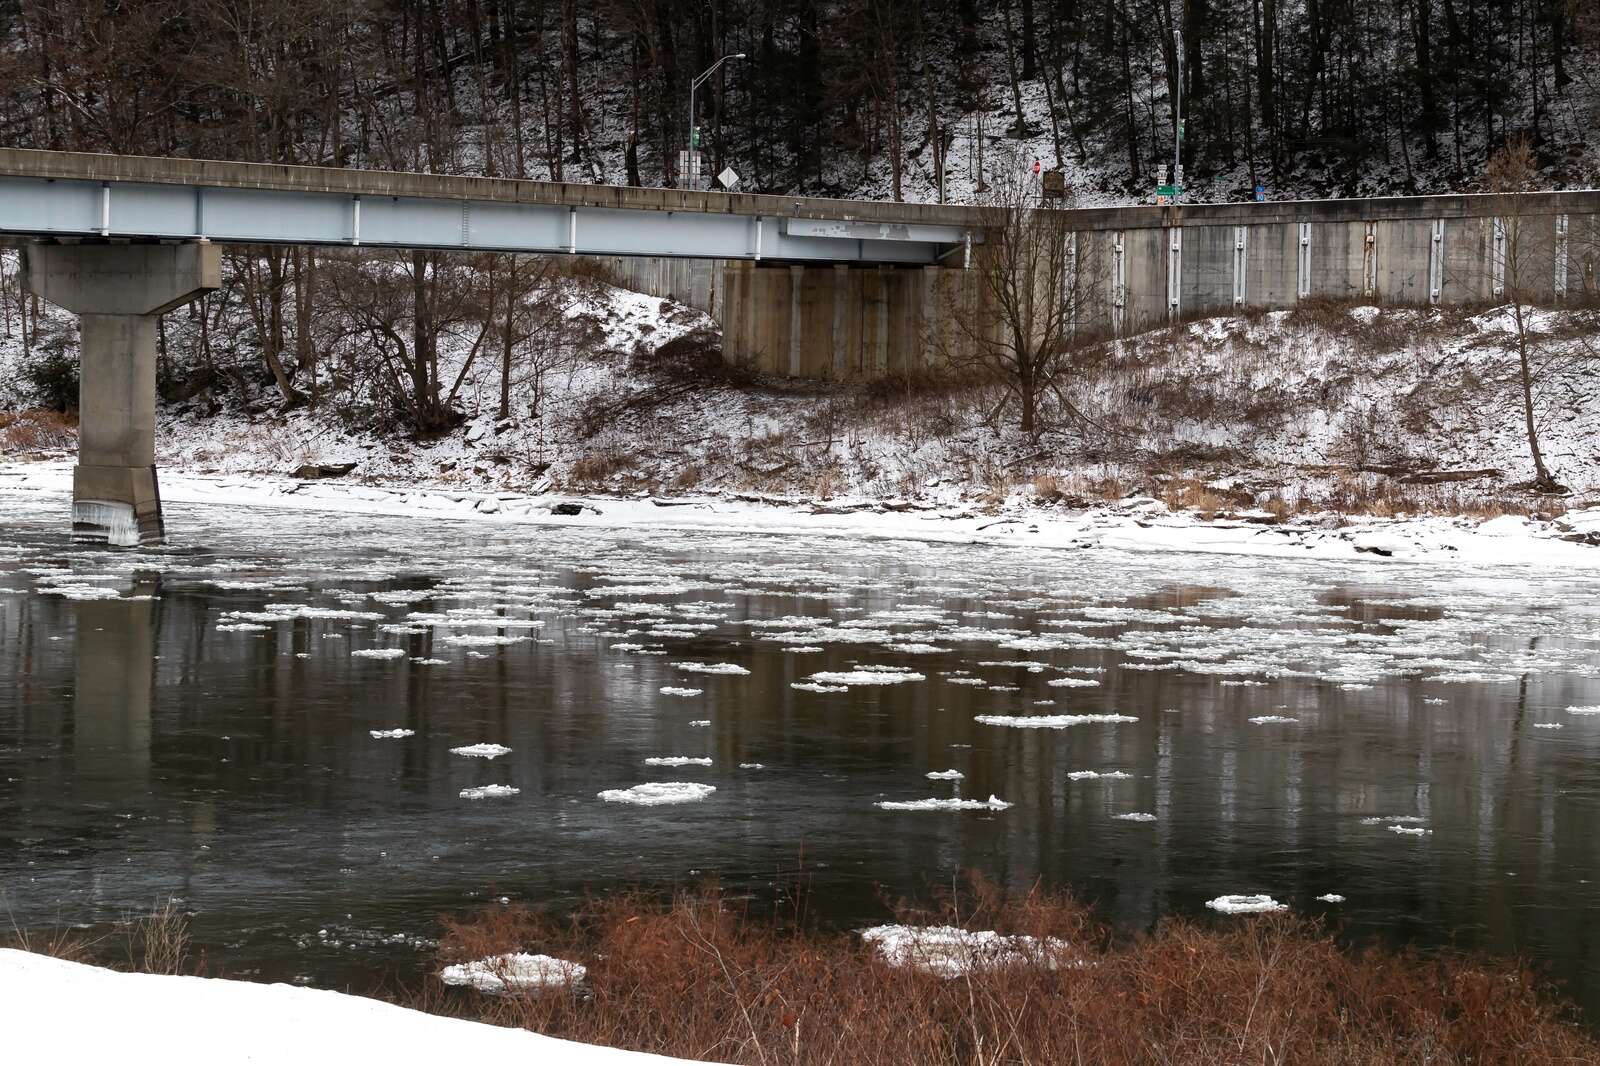 Ice chunks float down the Allegheny River